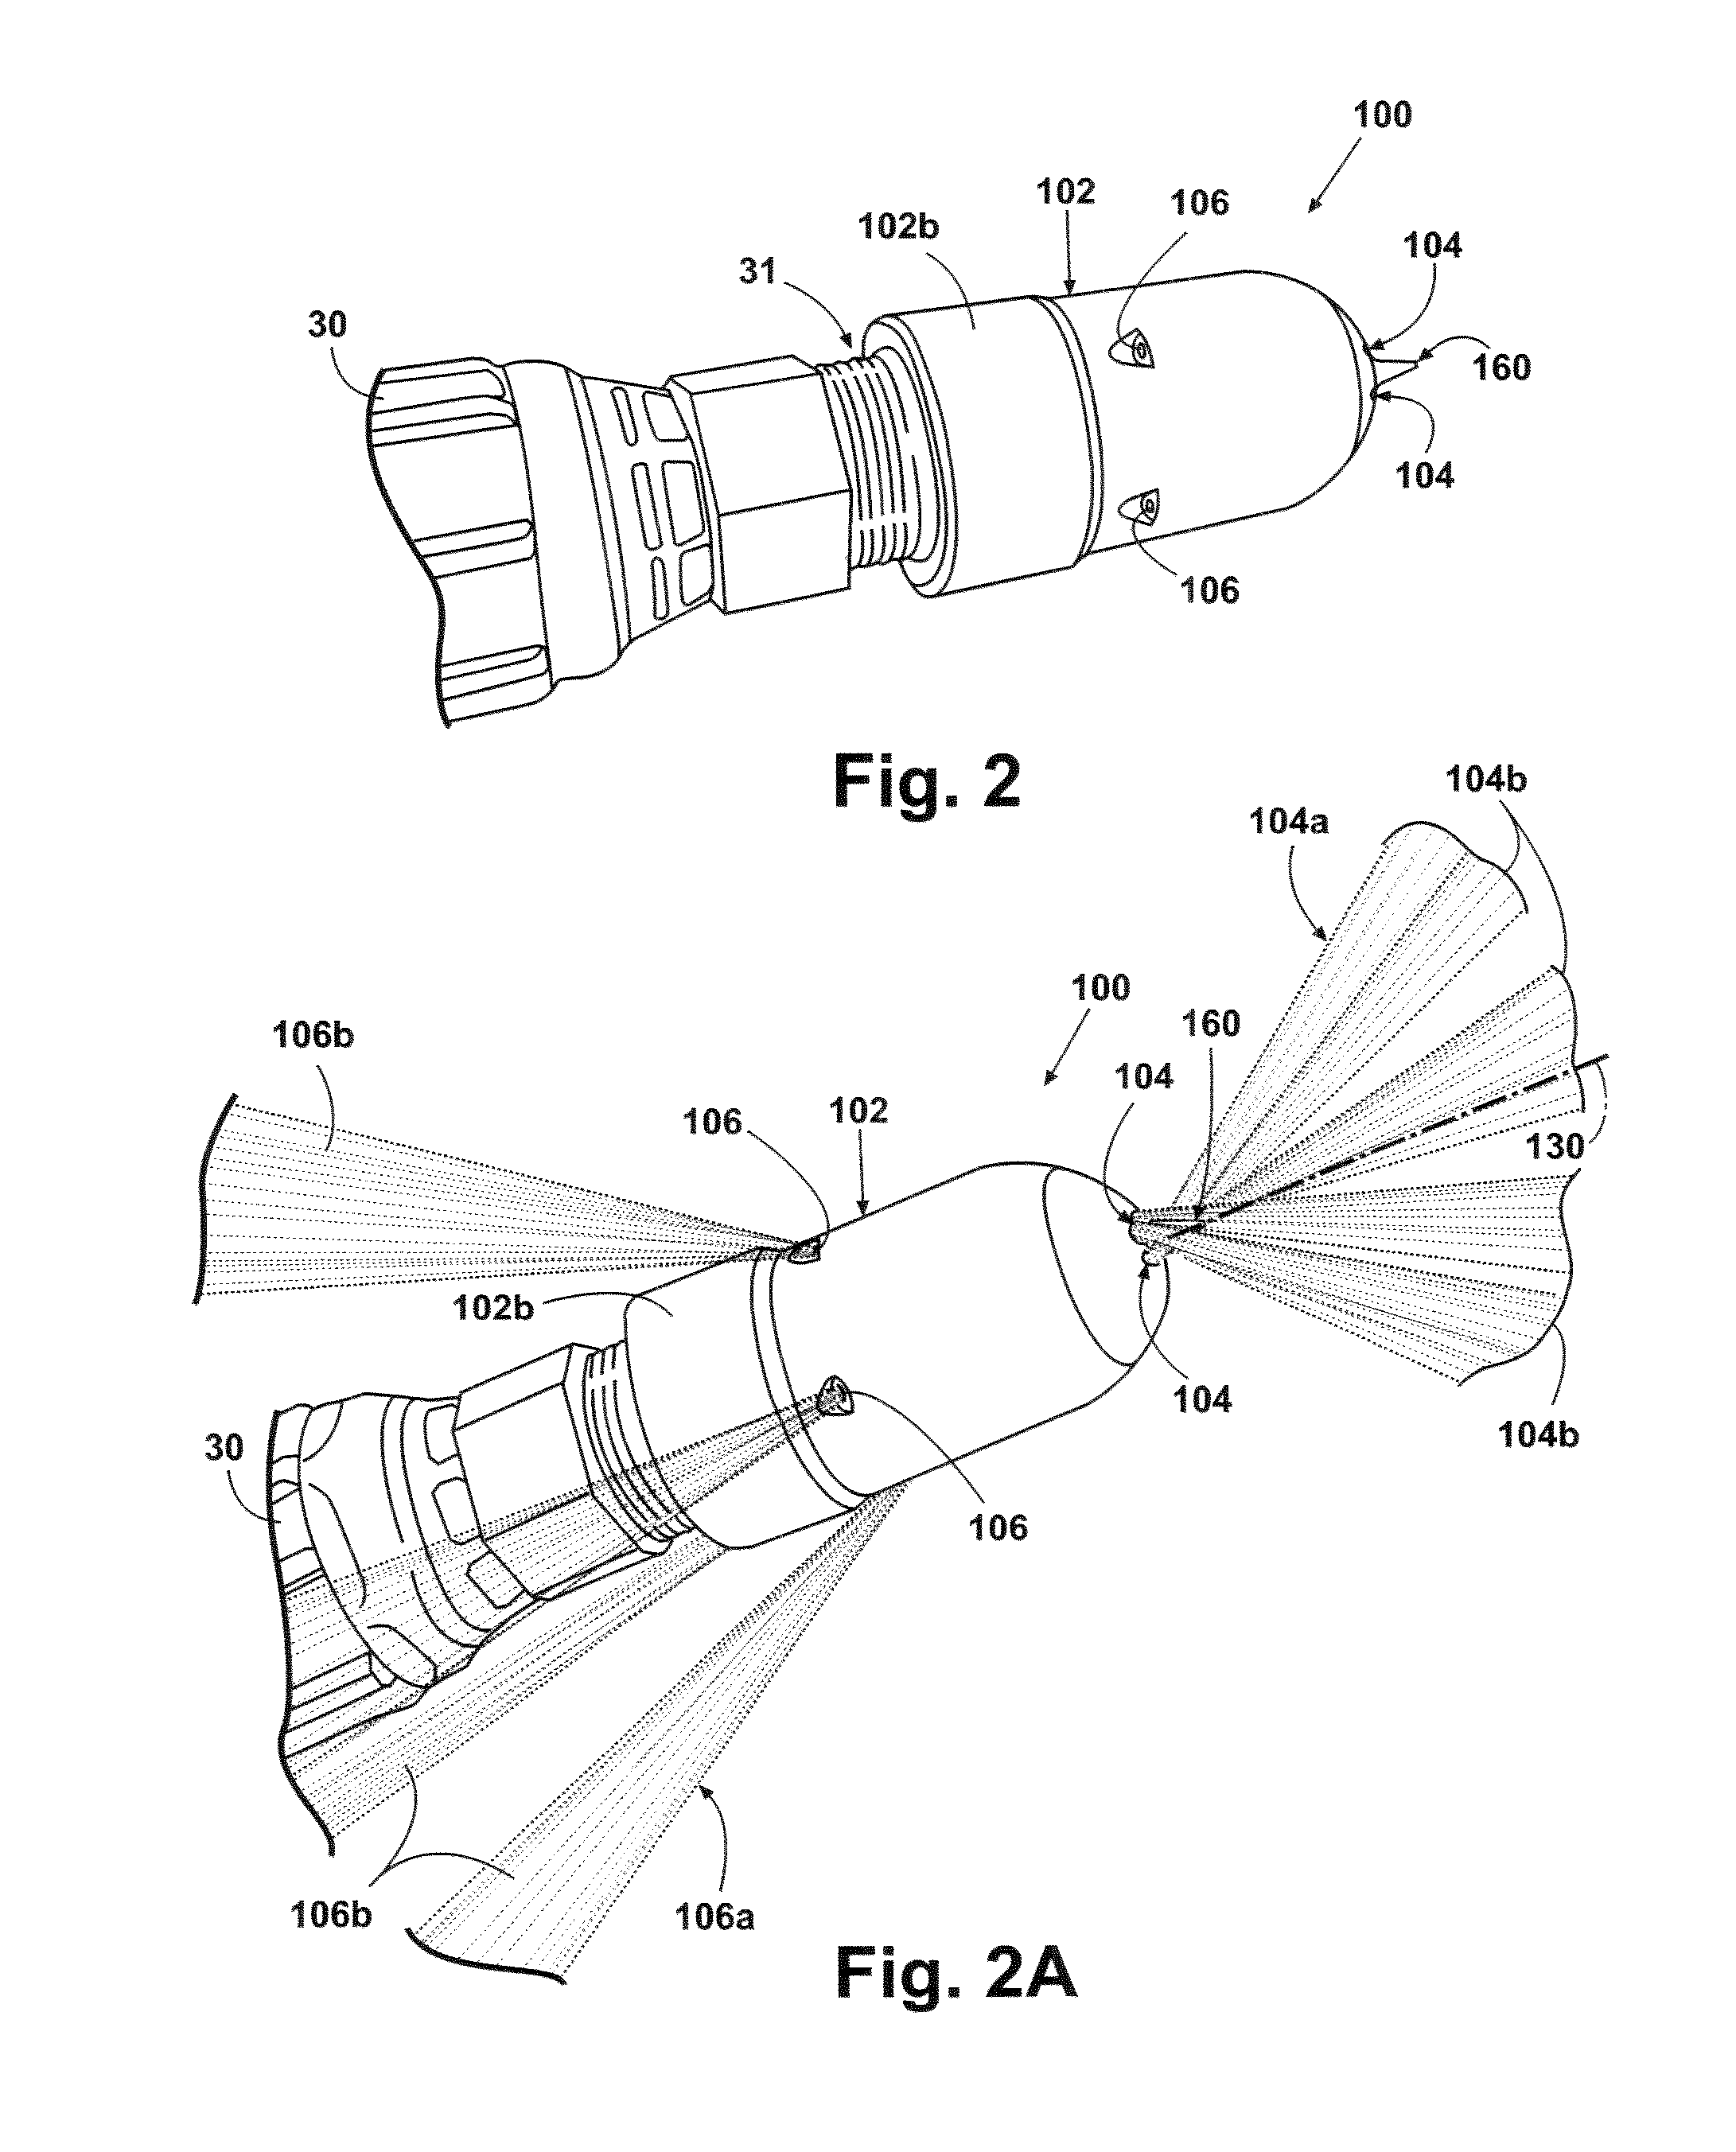 Method and apparatus for forming a borehole